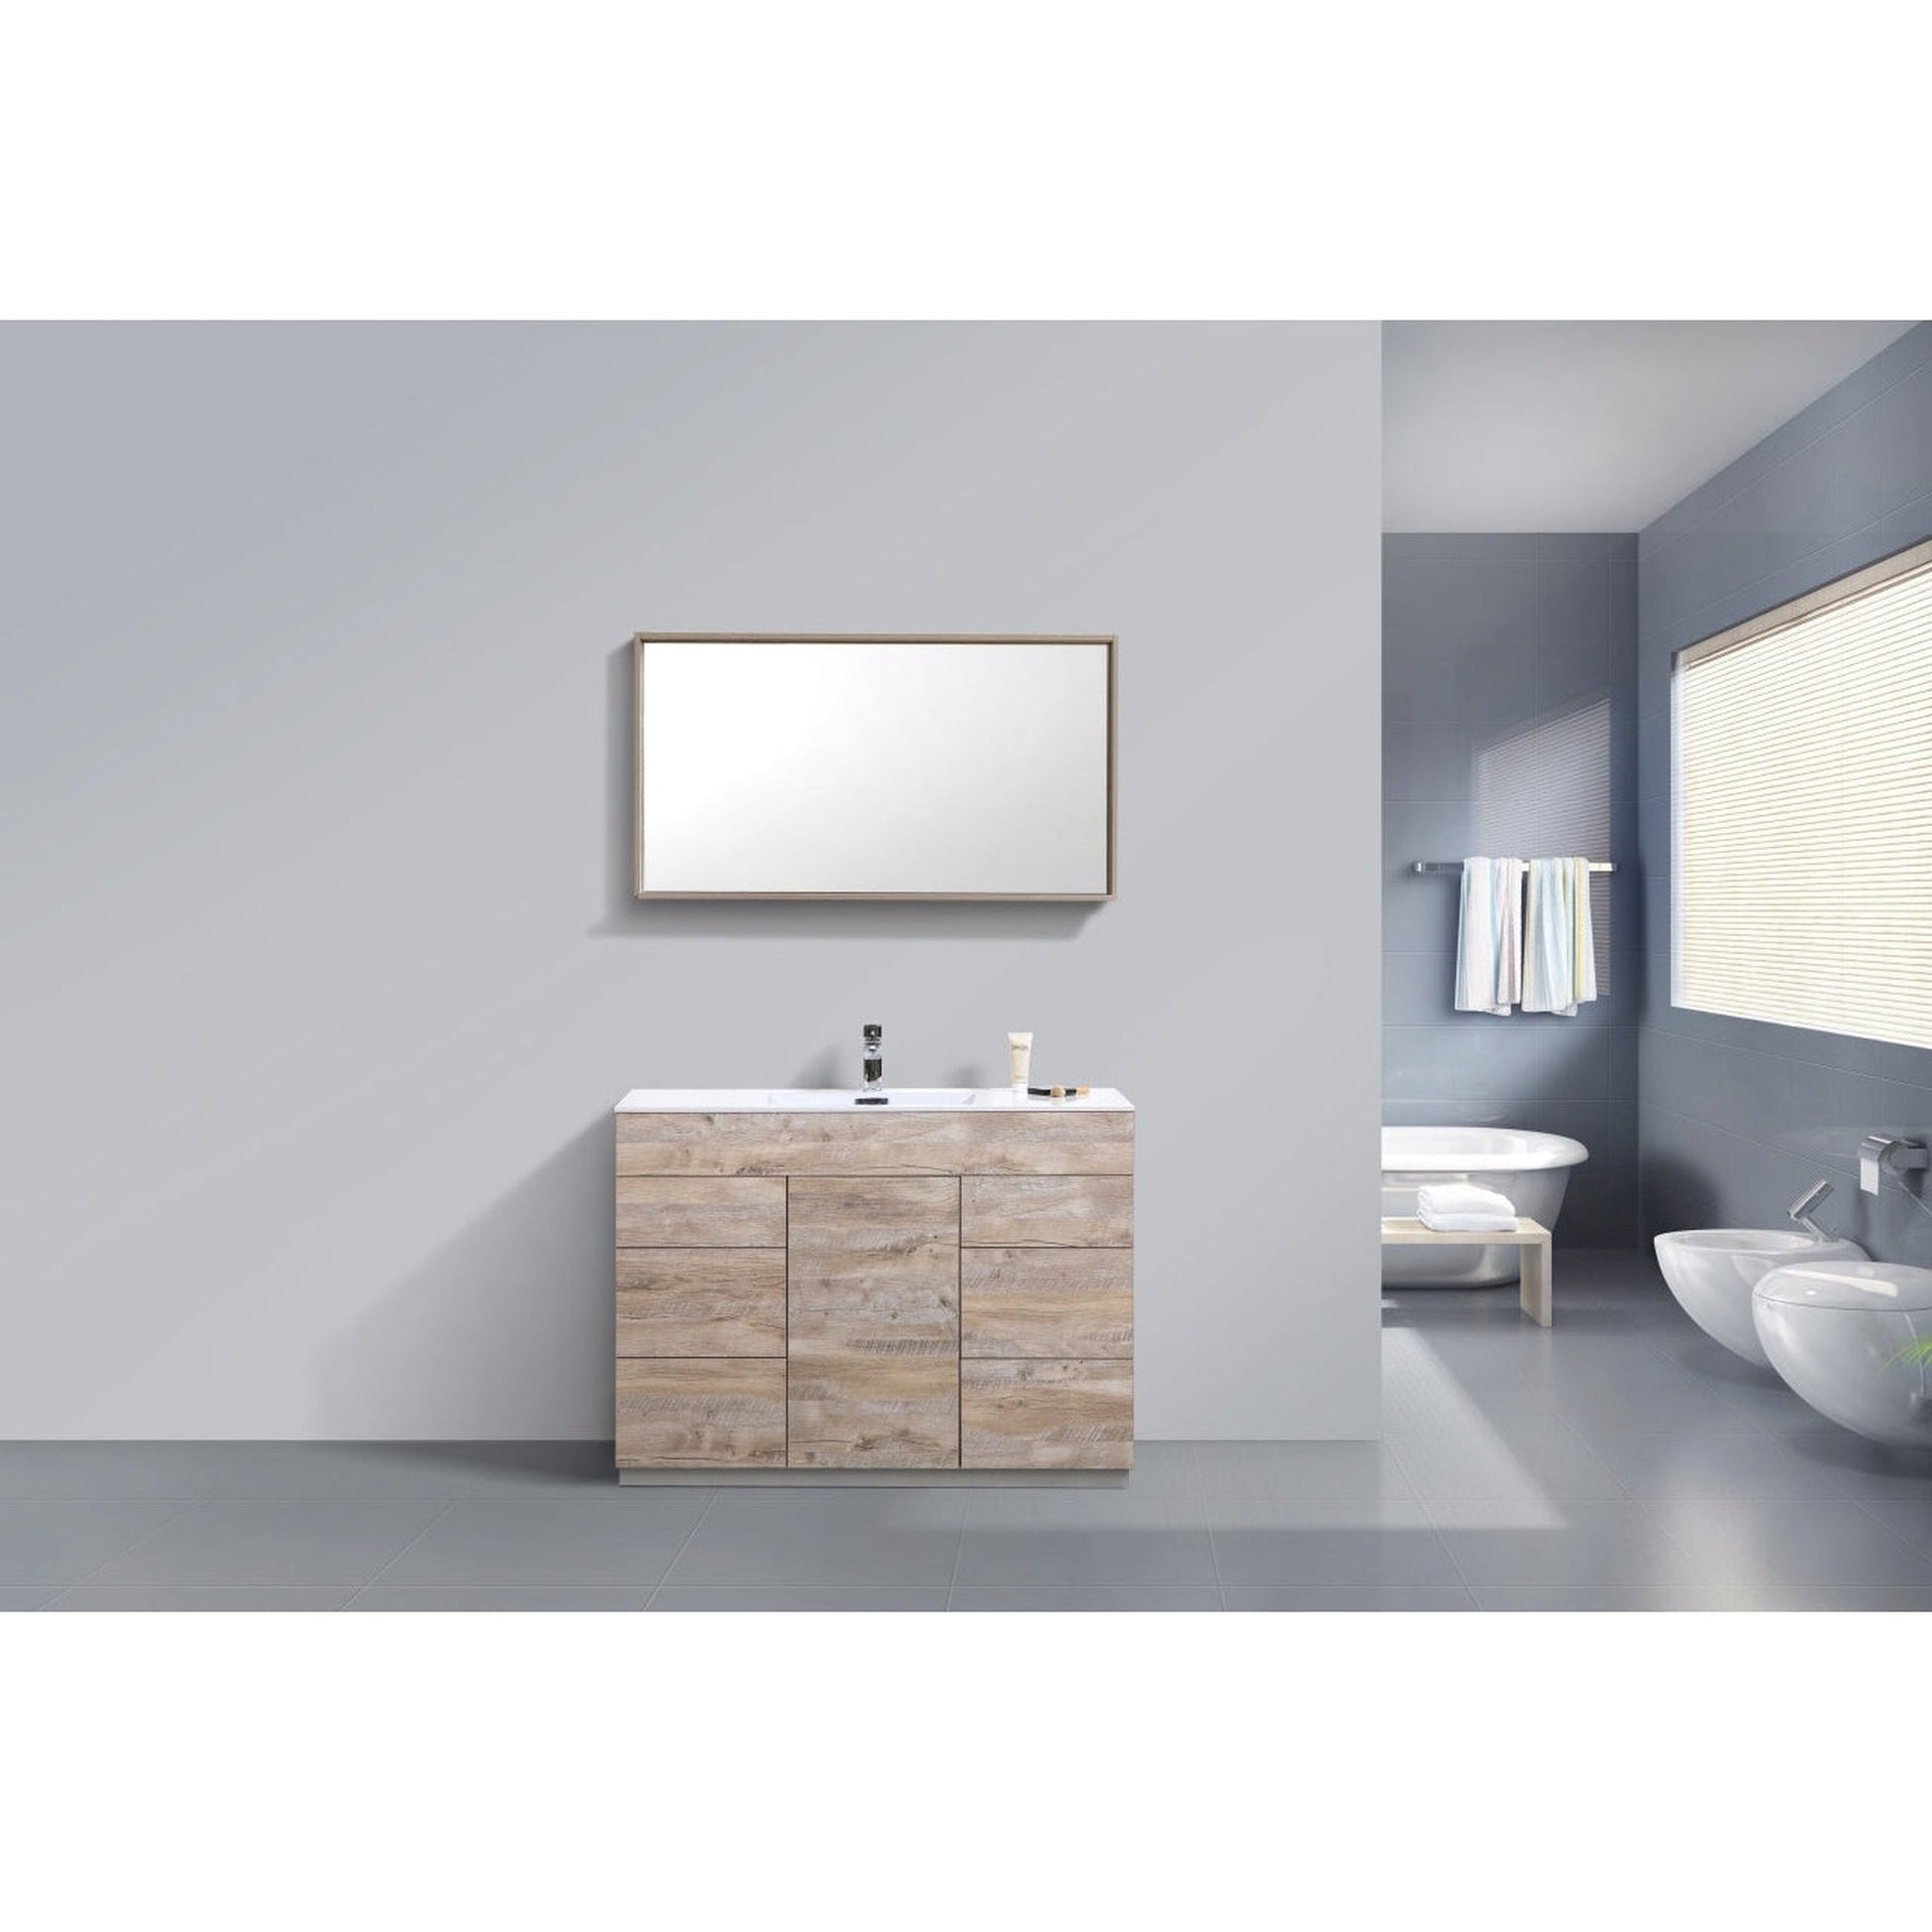 KubeBath Milano 48" Nature Wood Freestanding Modern Bathroom Vanity With Single Integrated Acrylic Sink With Overflow and 48" Wood Framed Mirror With Shelf